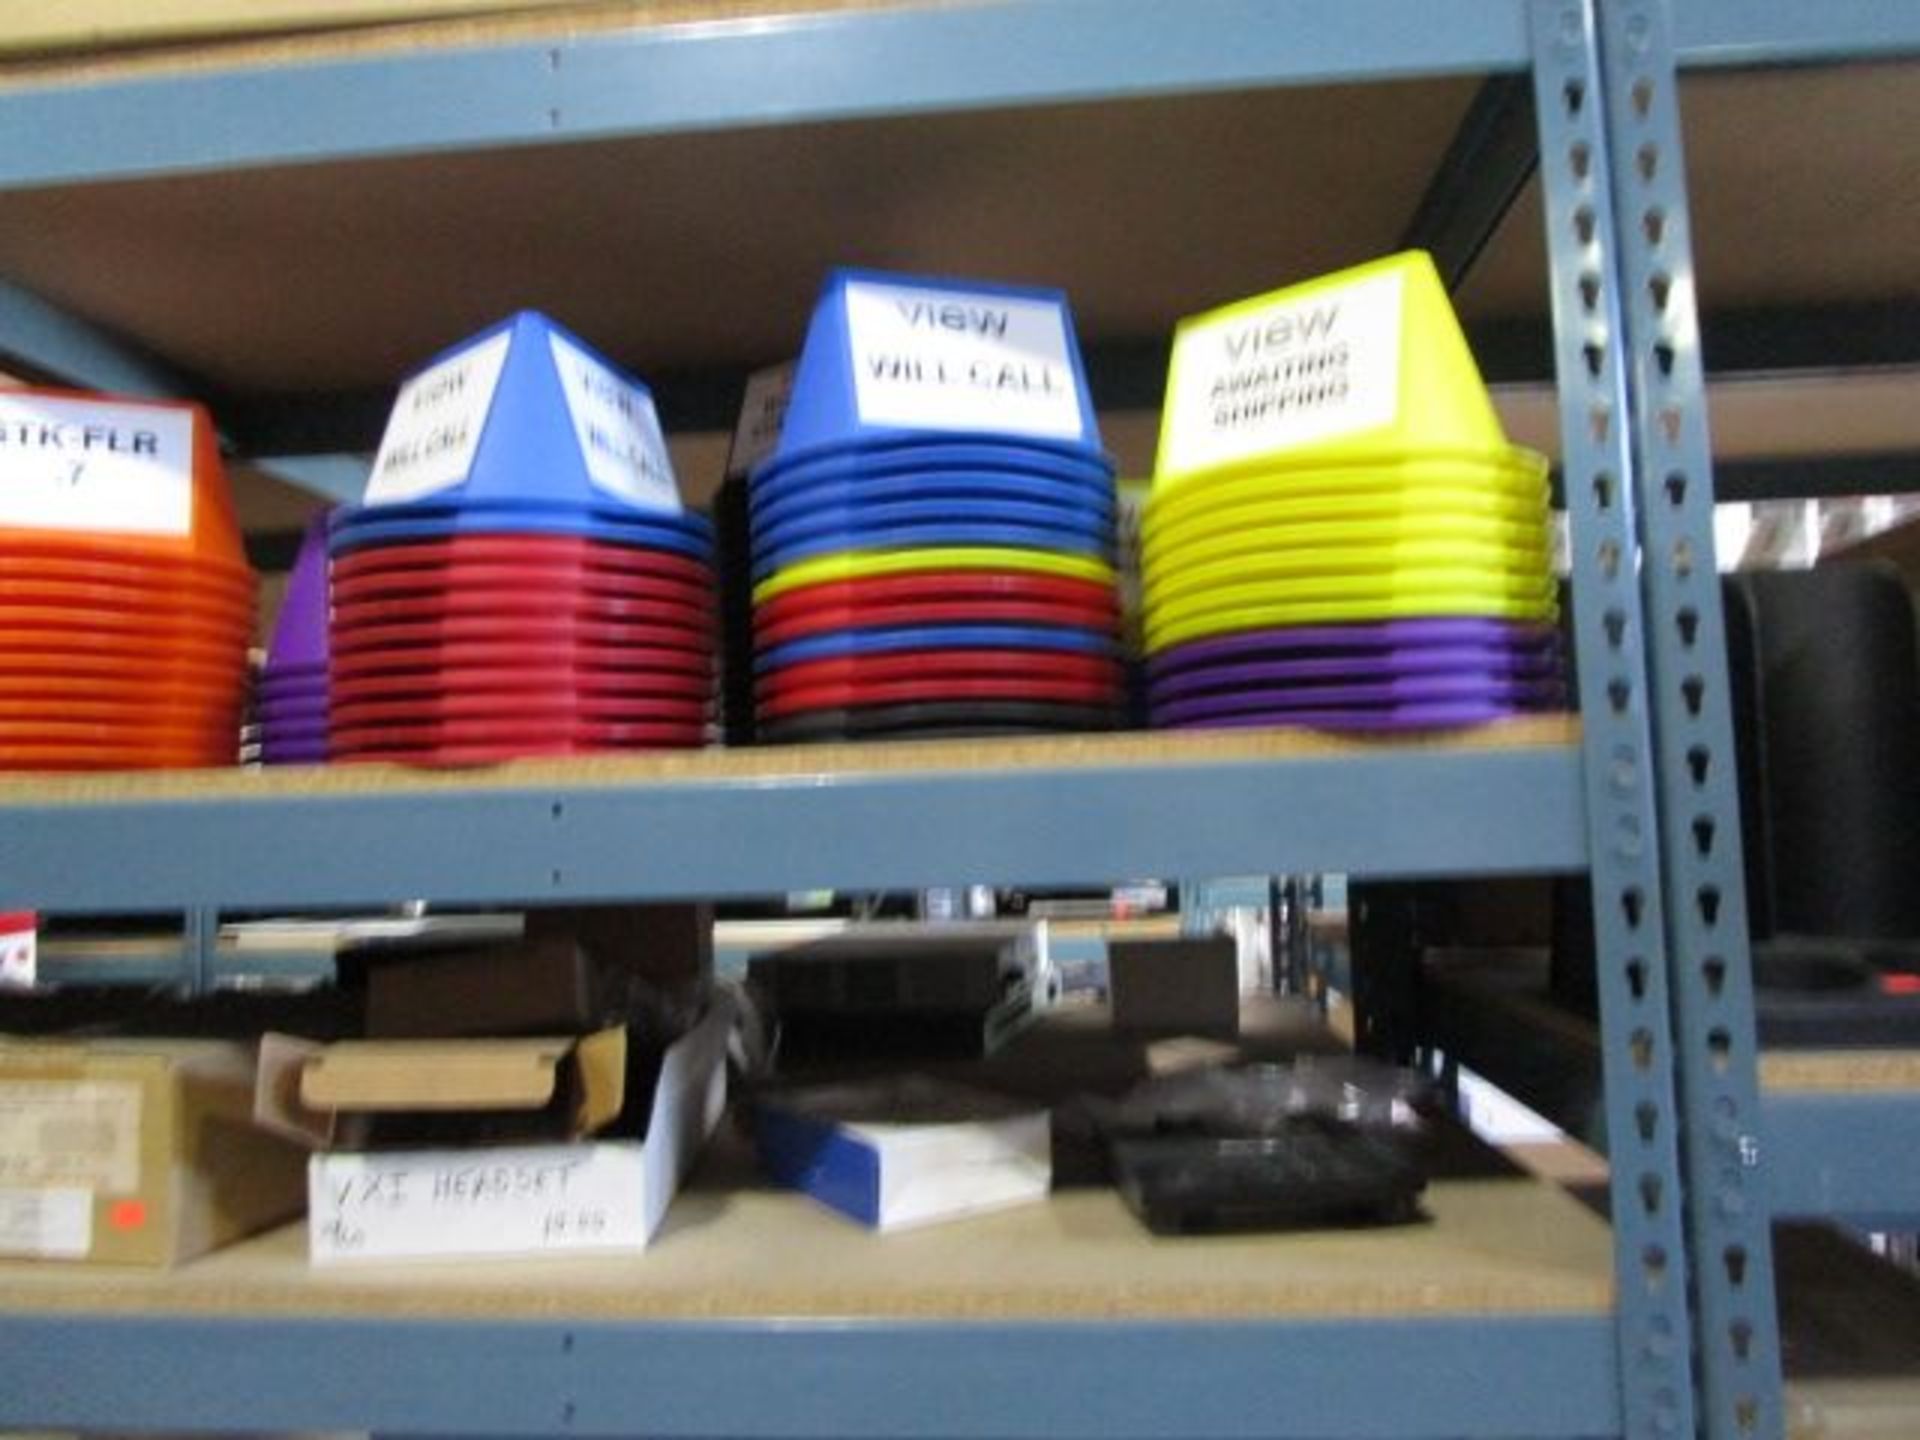 SHELVING UNIT OF ASSORTMENT OF ATTENTION CONES, MARKERS, BINDERS - Image 5 of 14